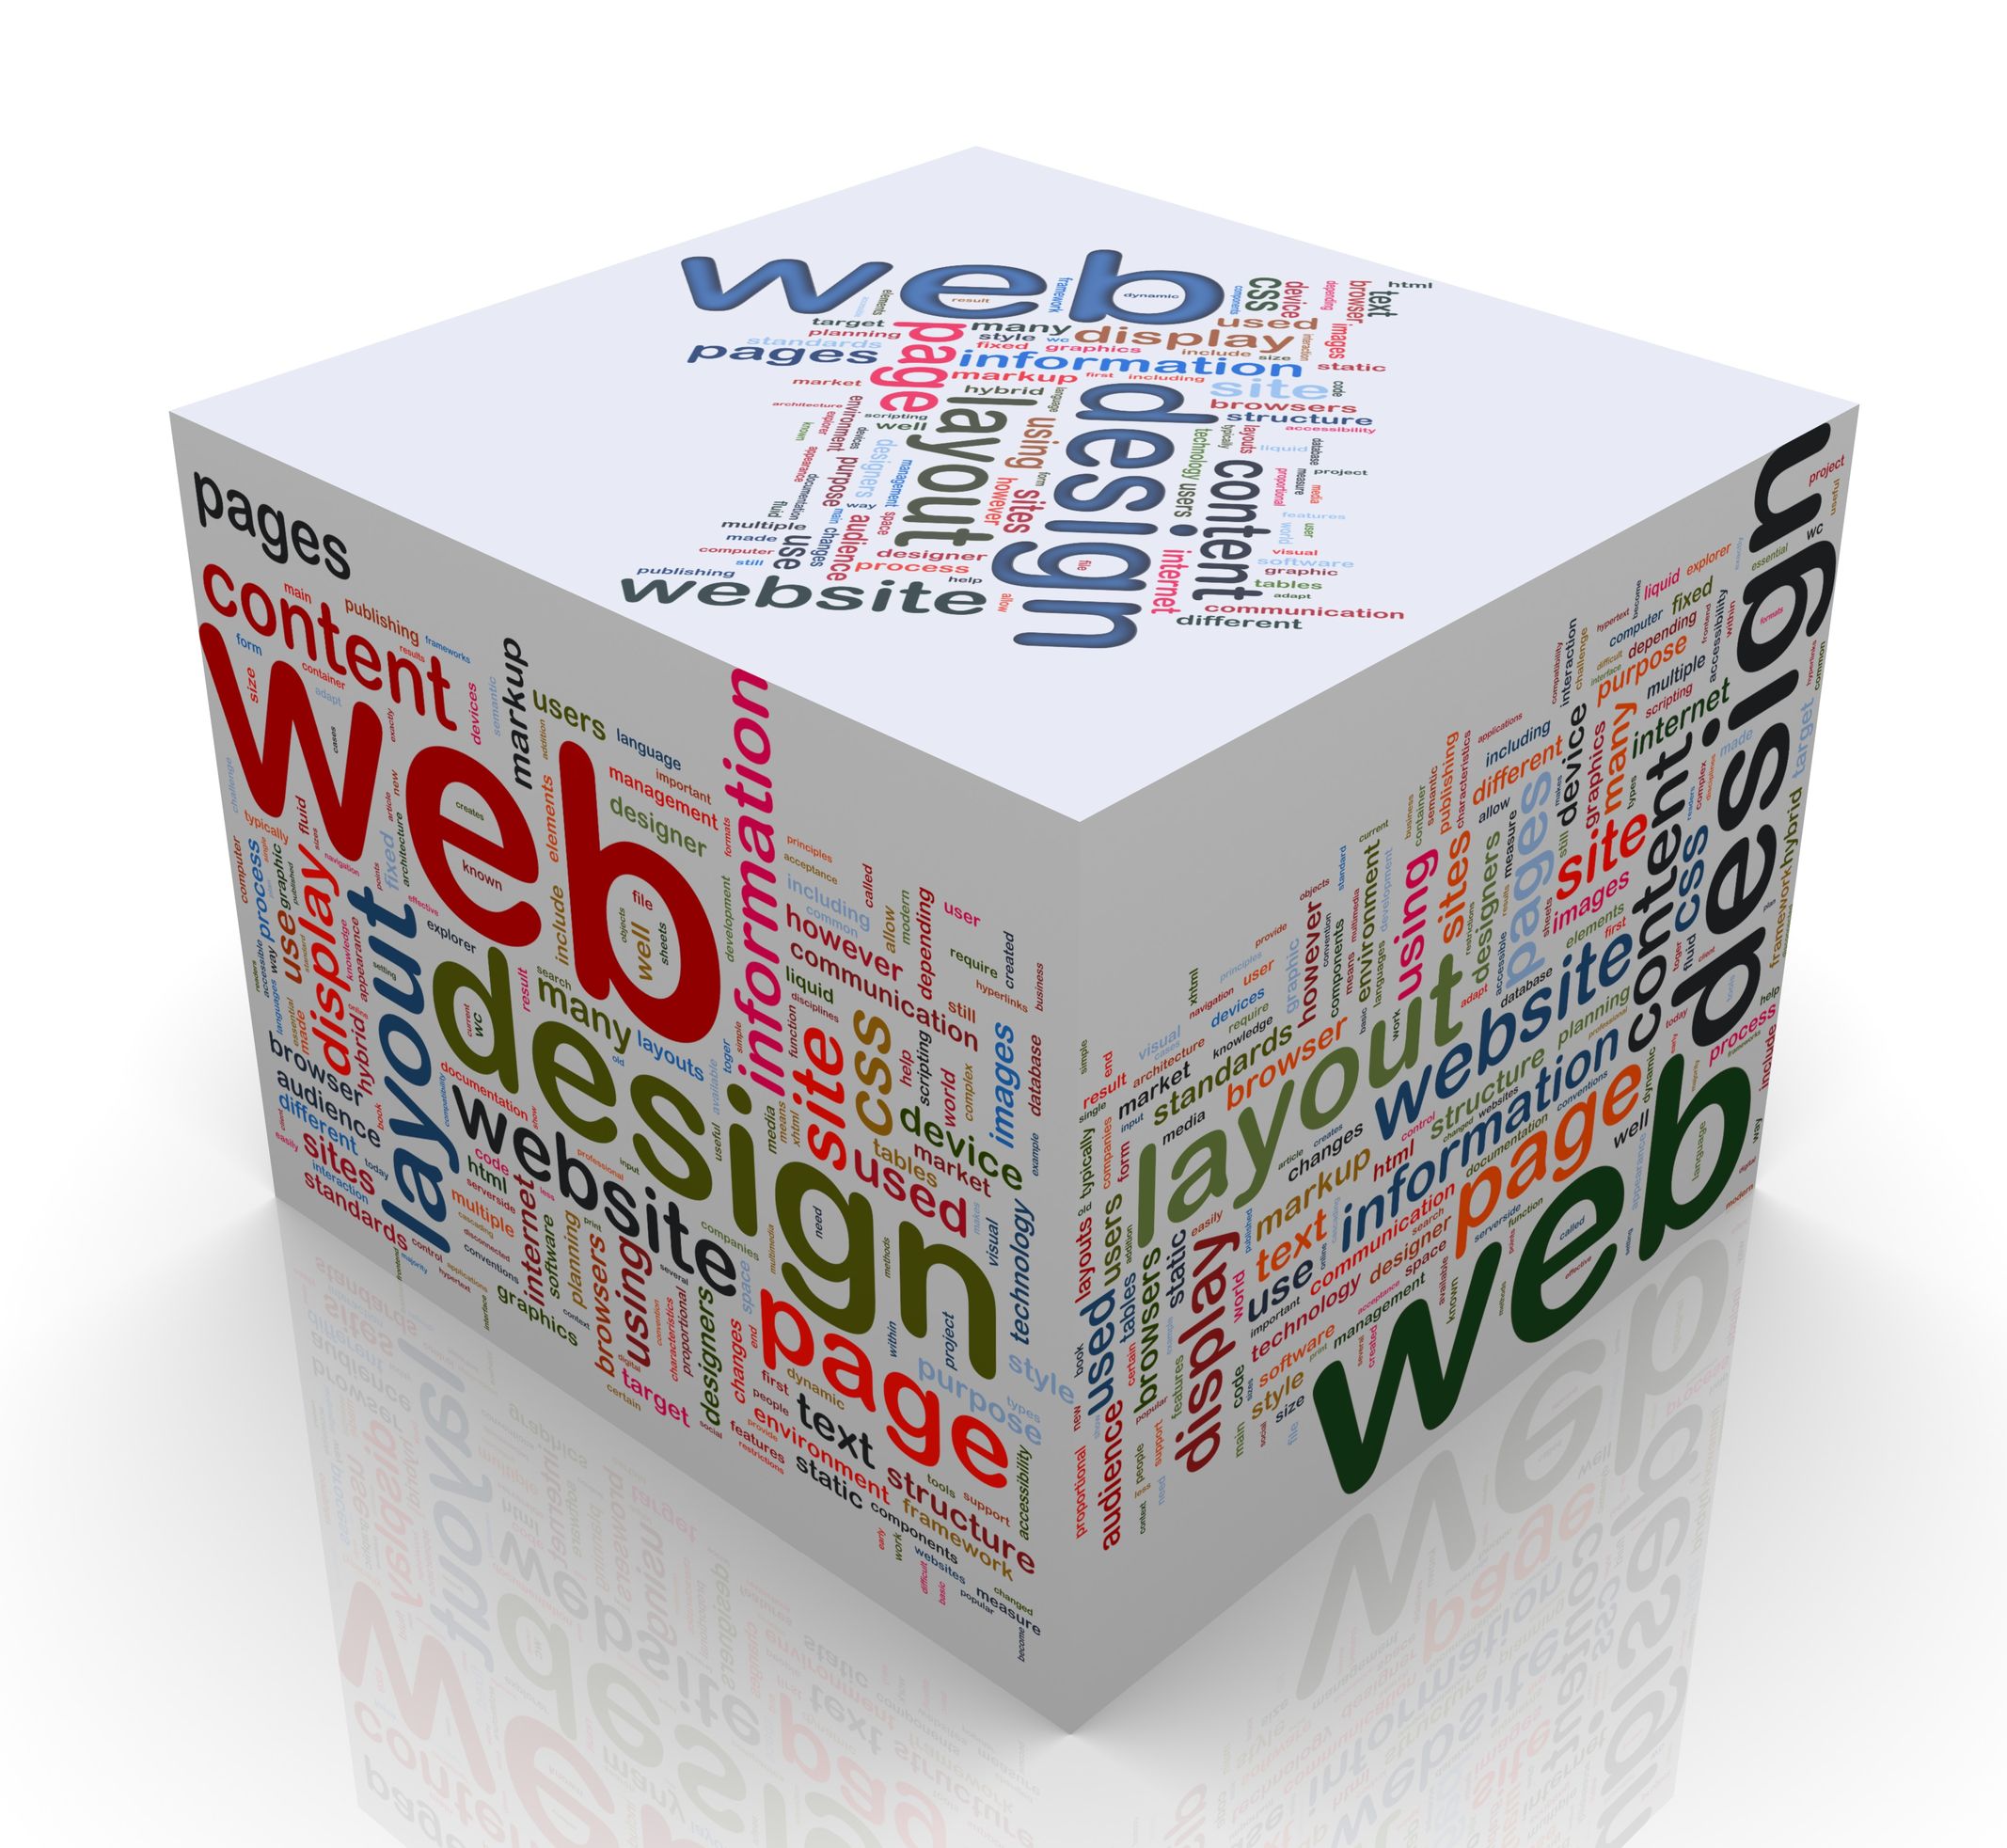 Image of cube with lots of web design terms